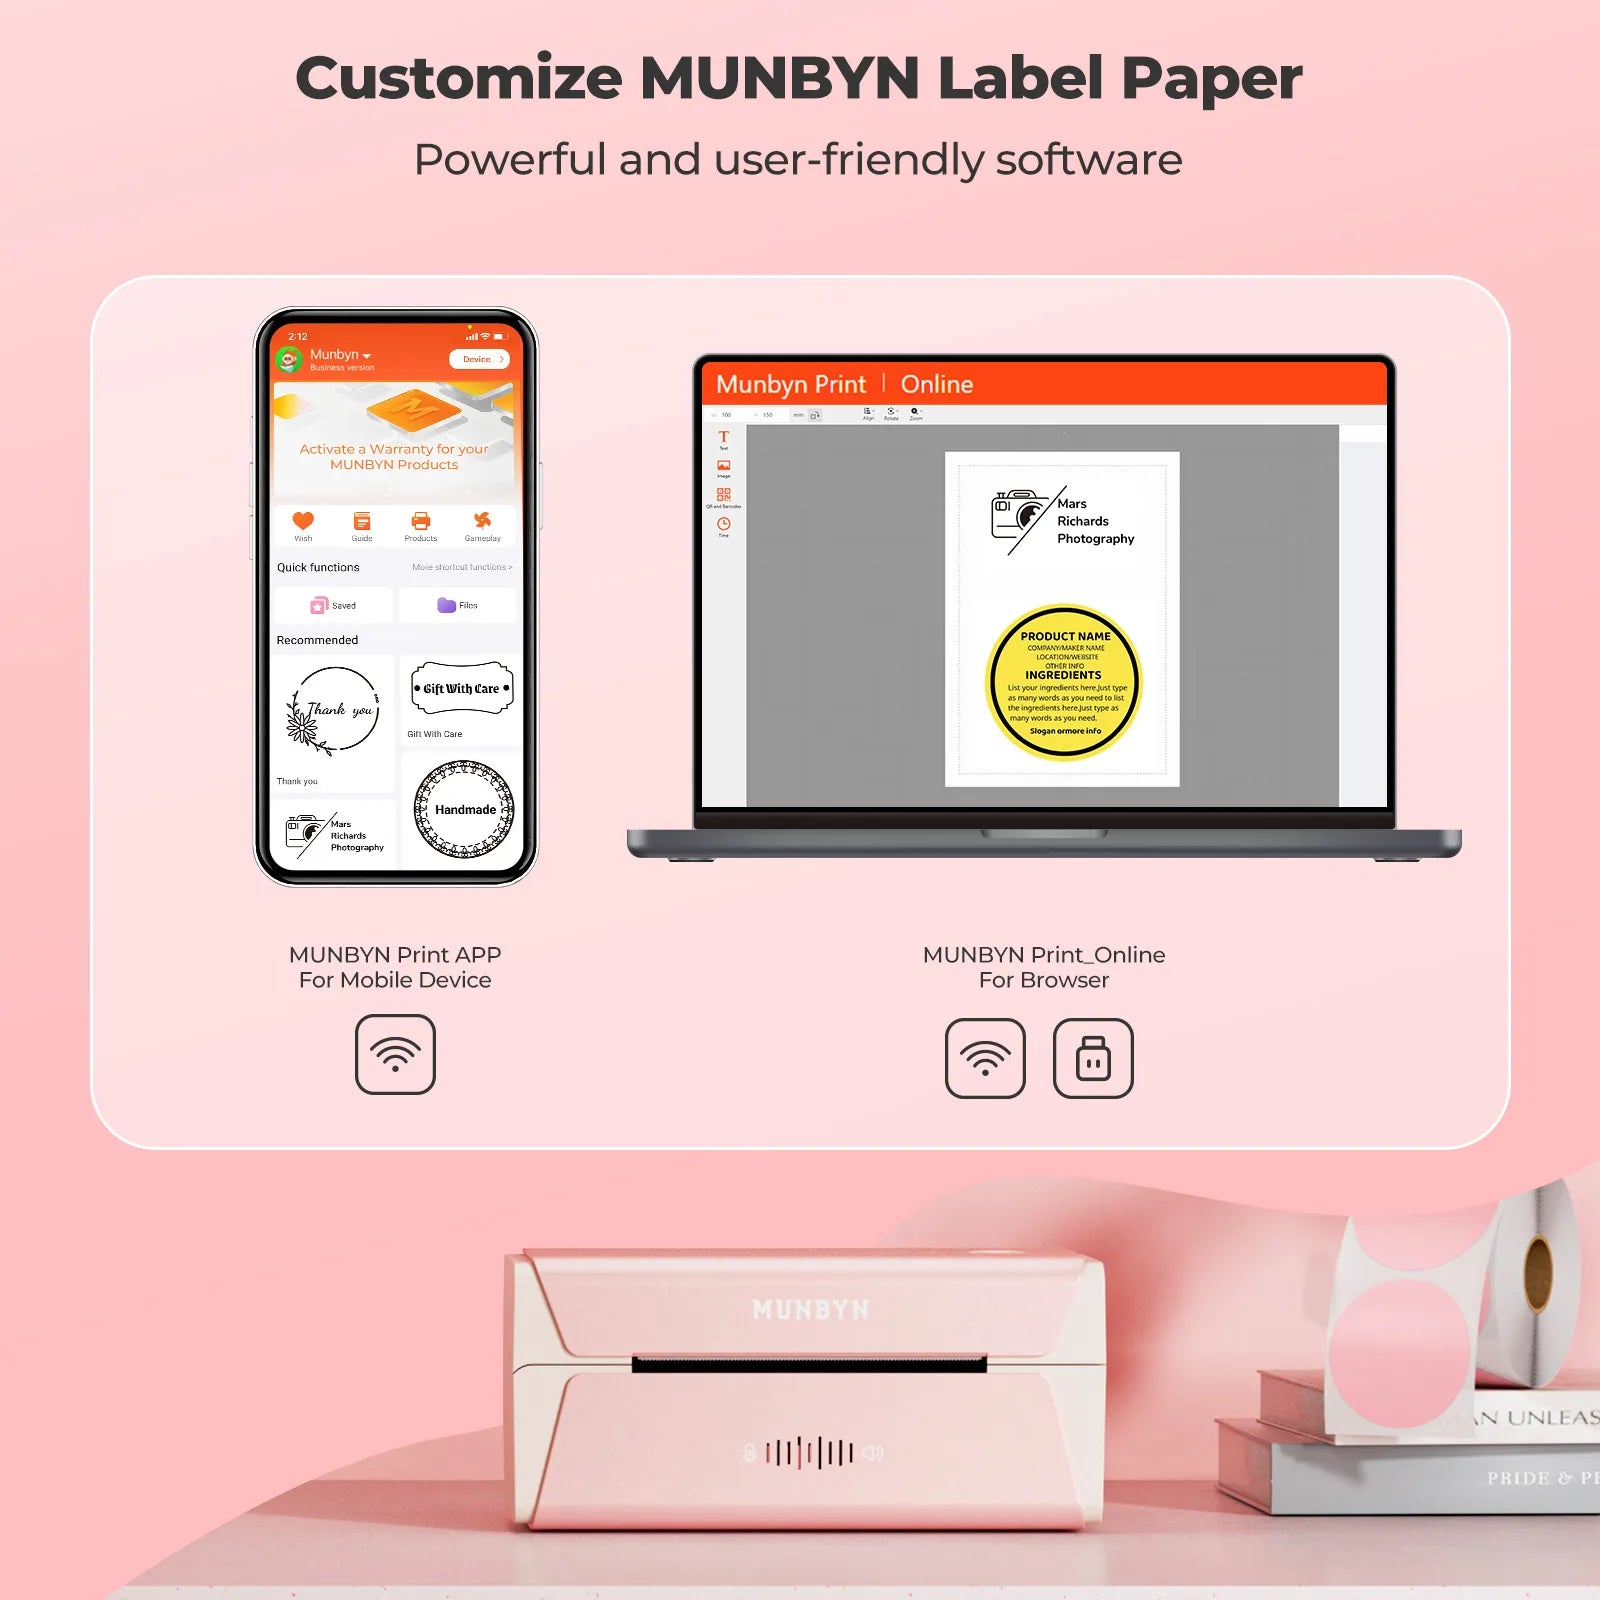 MUNBYN is available in desktop and application versions of user-friendly printing software that makes printing easier.